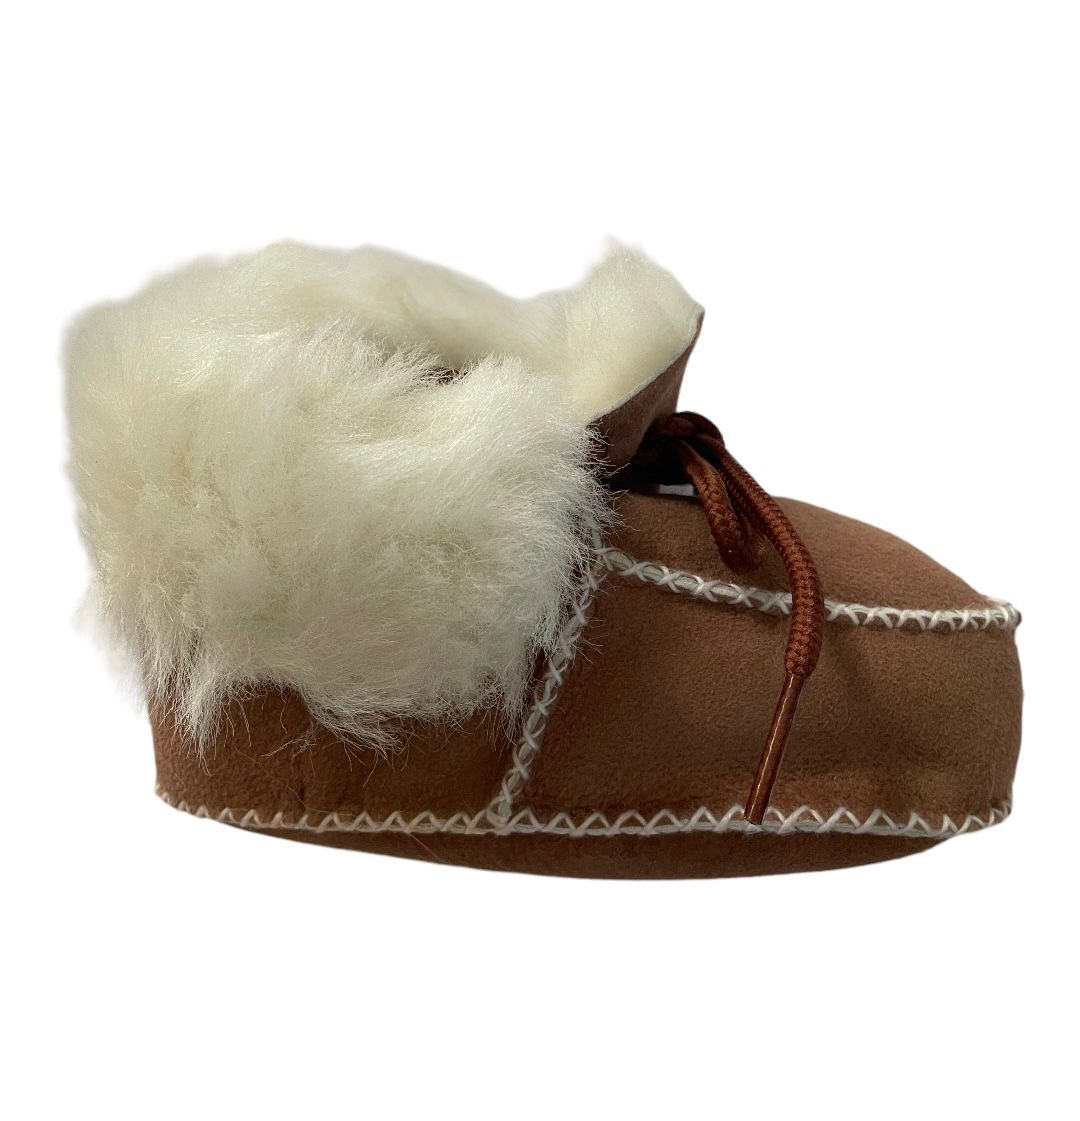 Sheepskin baby booties in chestnut with cord tie